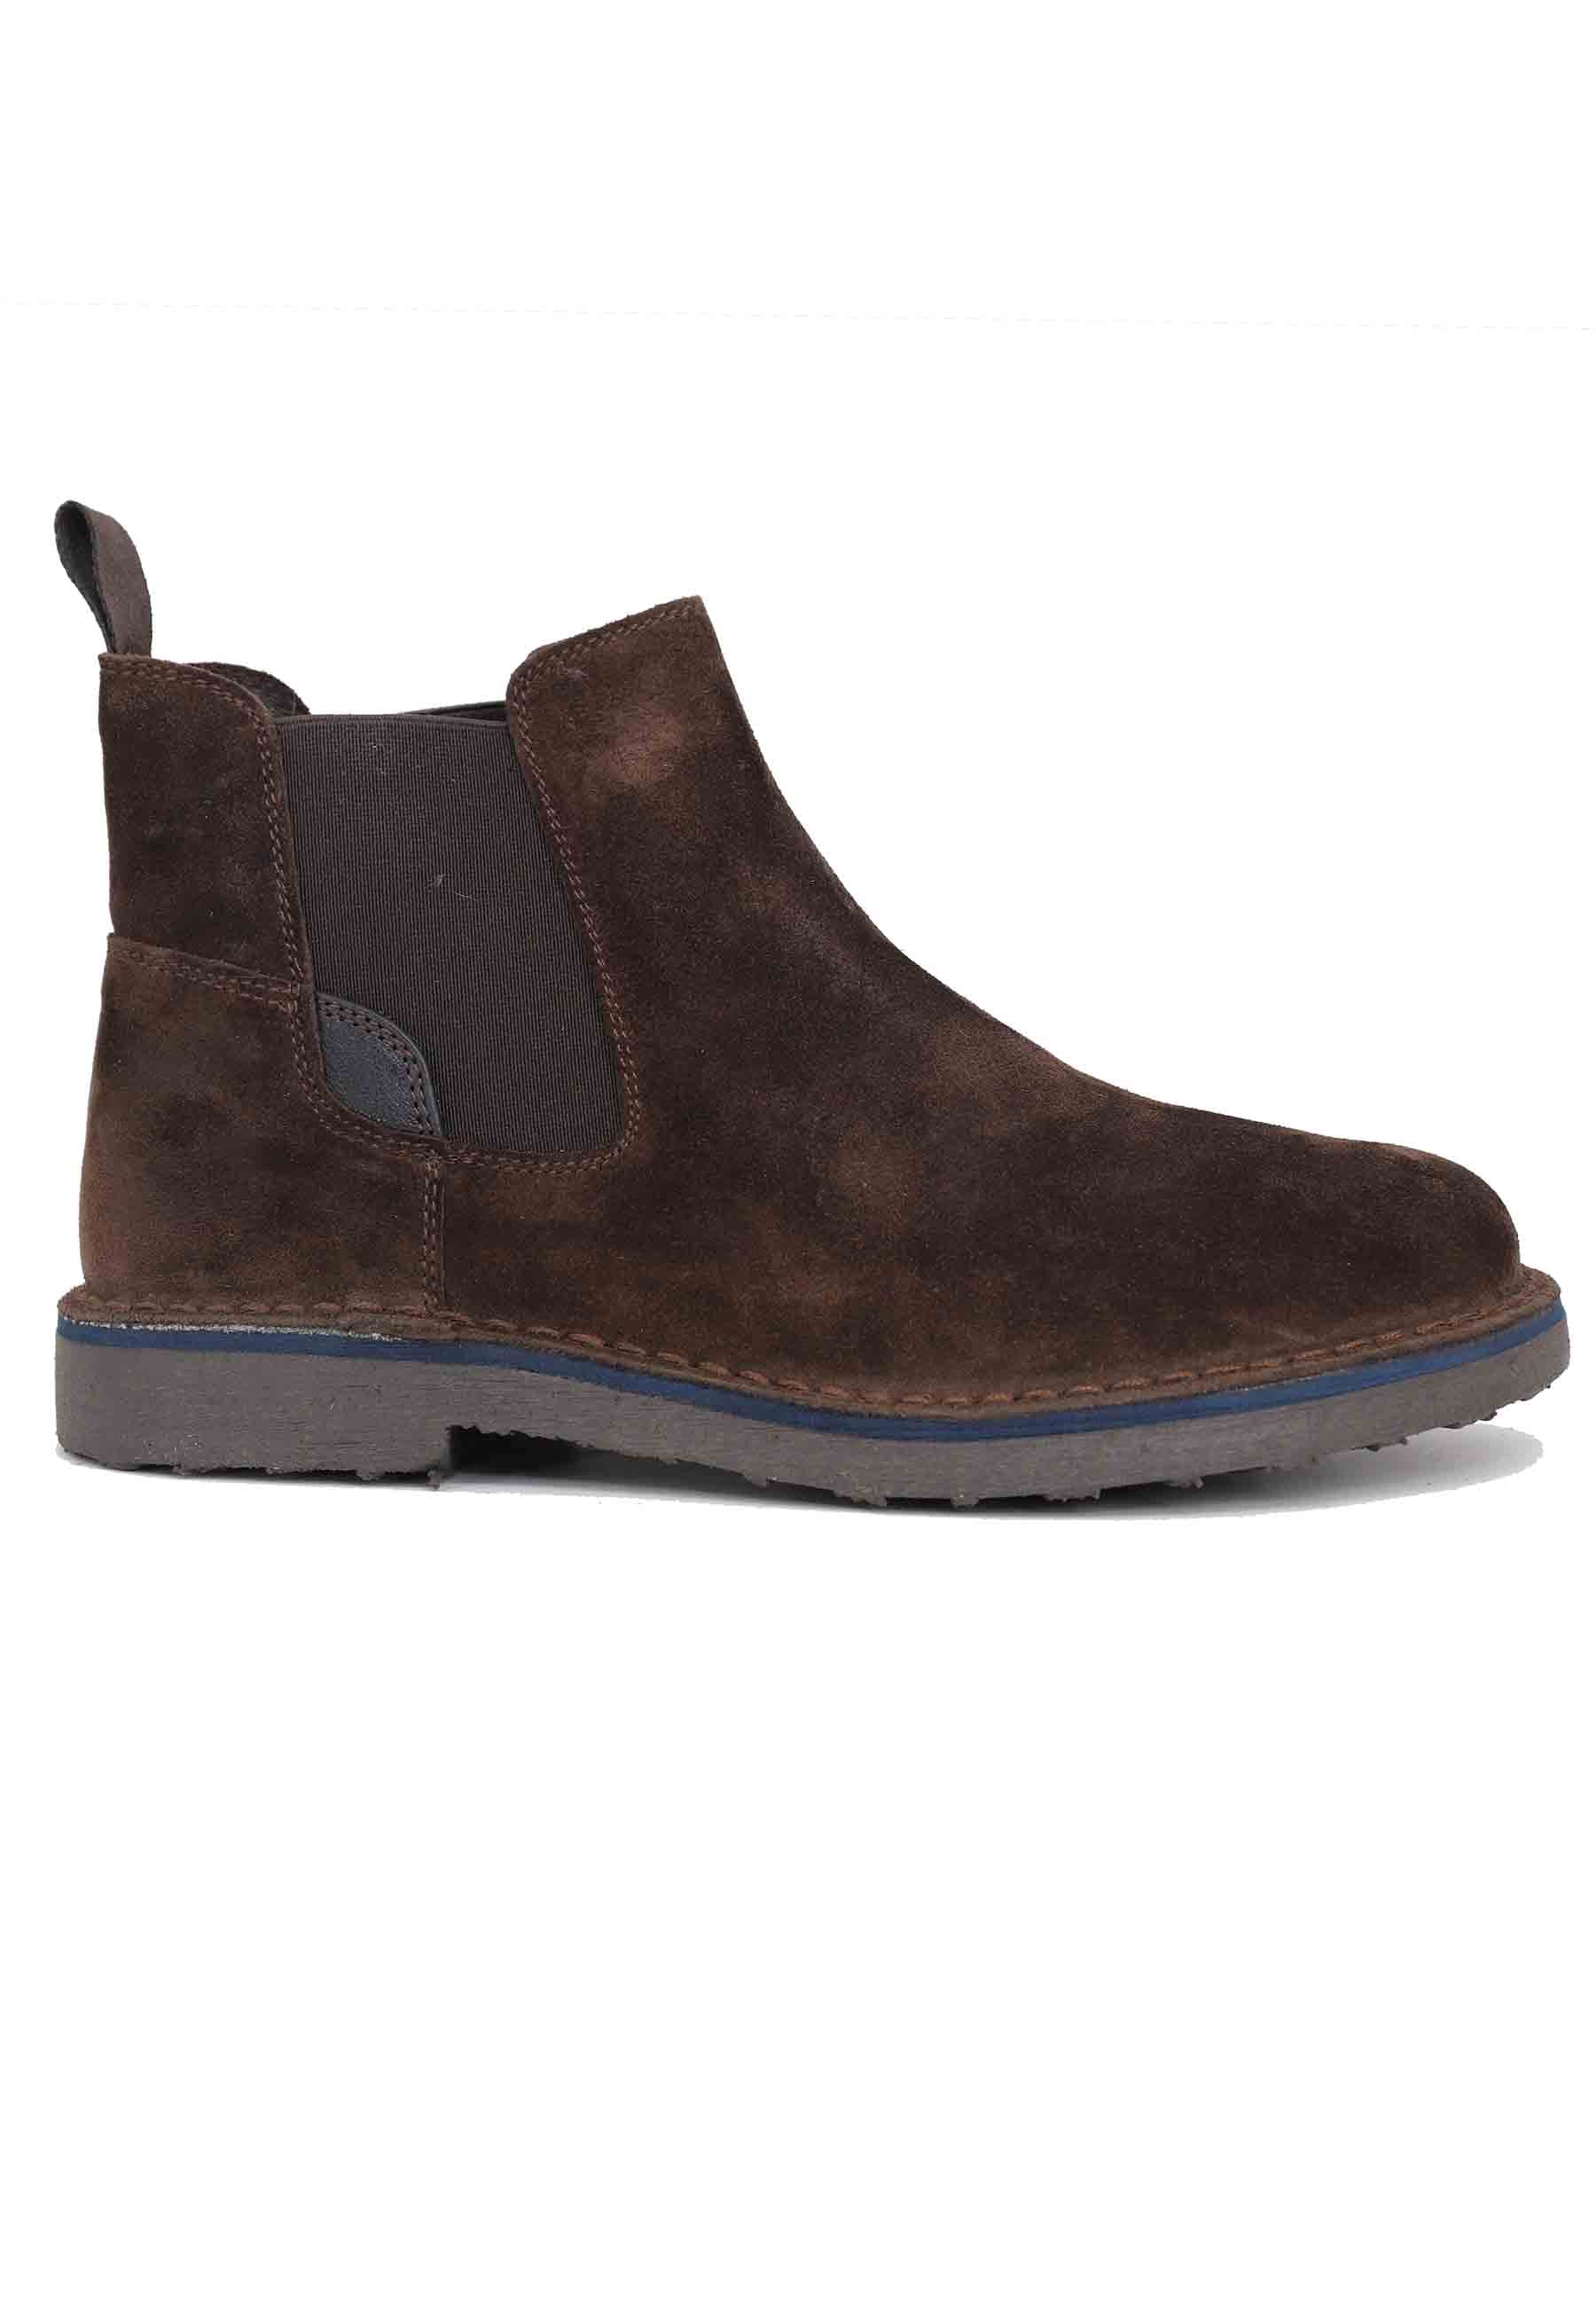 Chelsea boot in dark brown suede with rubber sole